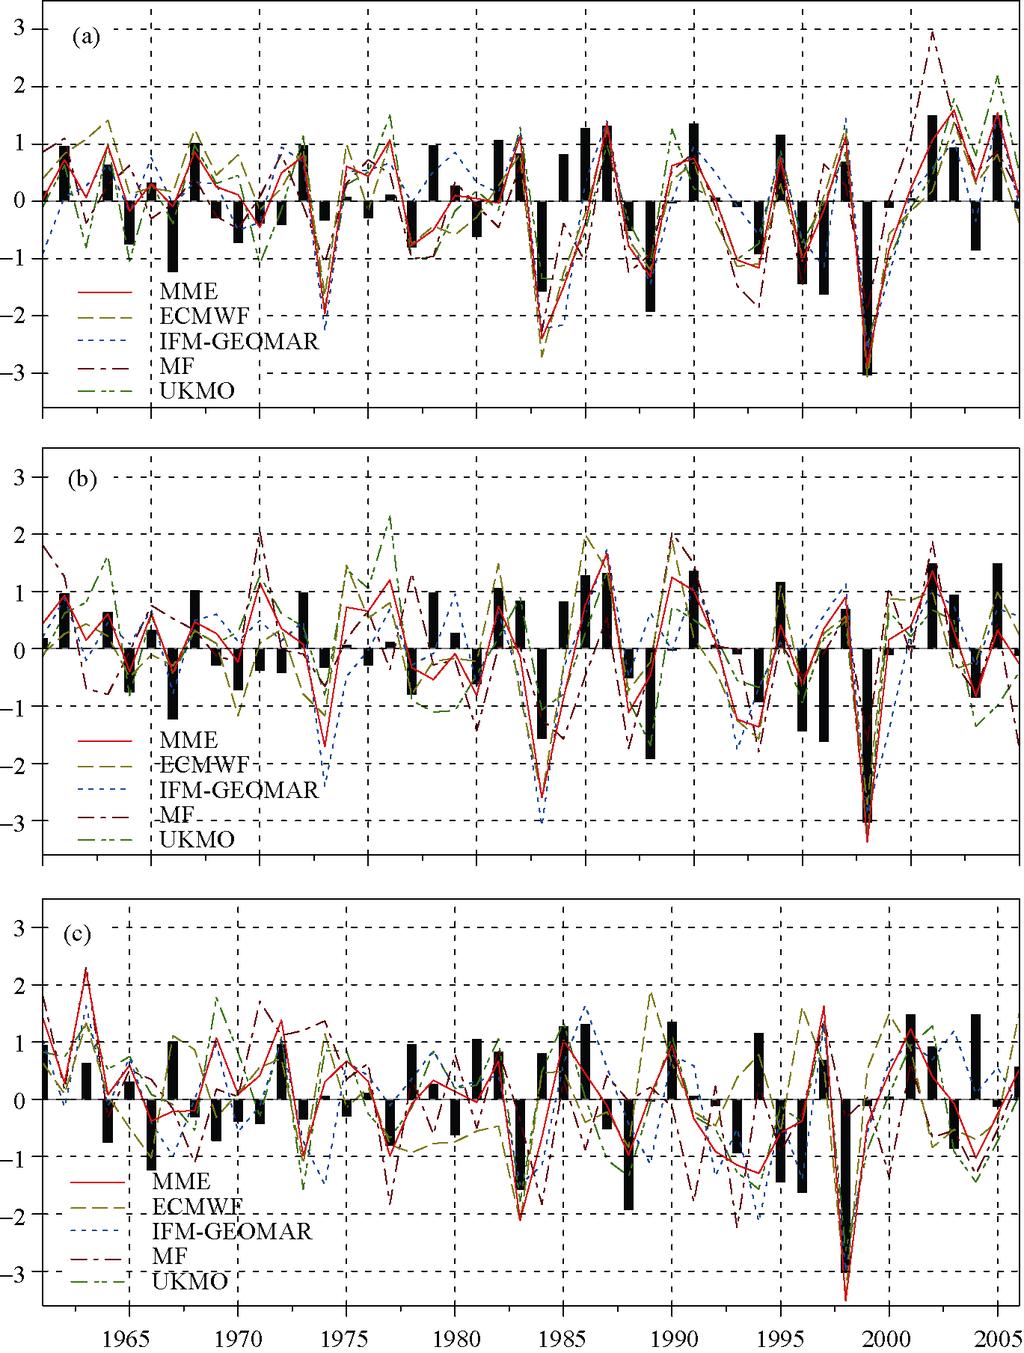 220 ATMOSPHERIC AND OCEANIC SCIENCE LETTERS VOL. 5 (NCEP/NCAR) reanalysis data (Kalnay et al.